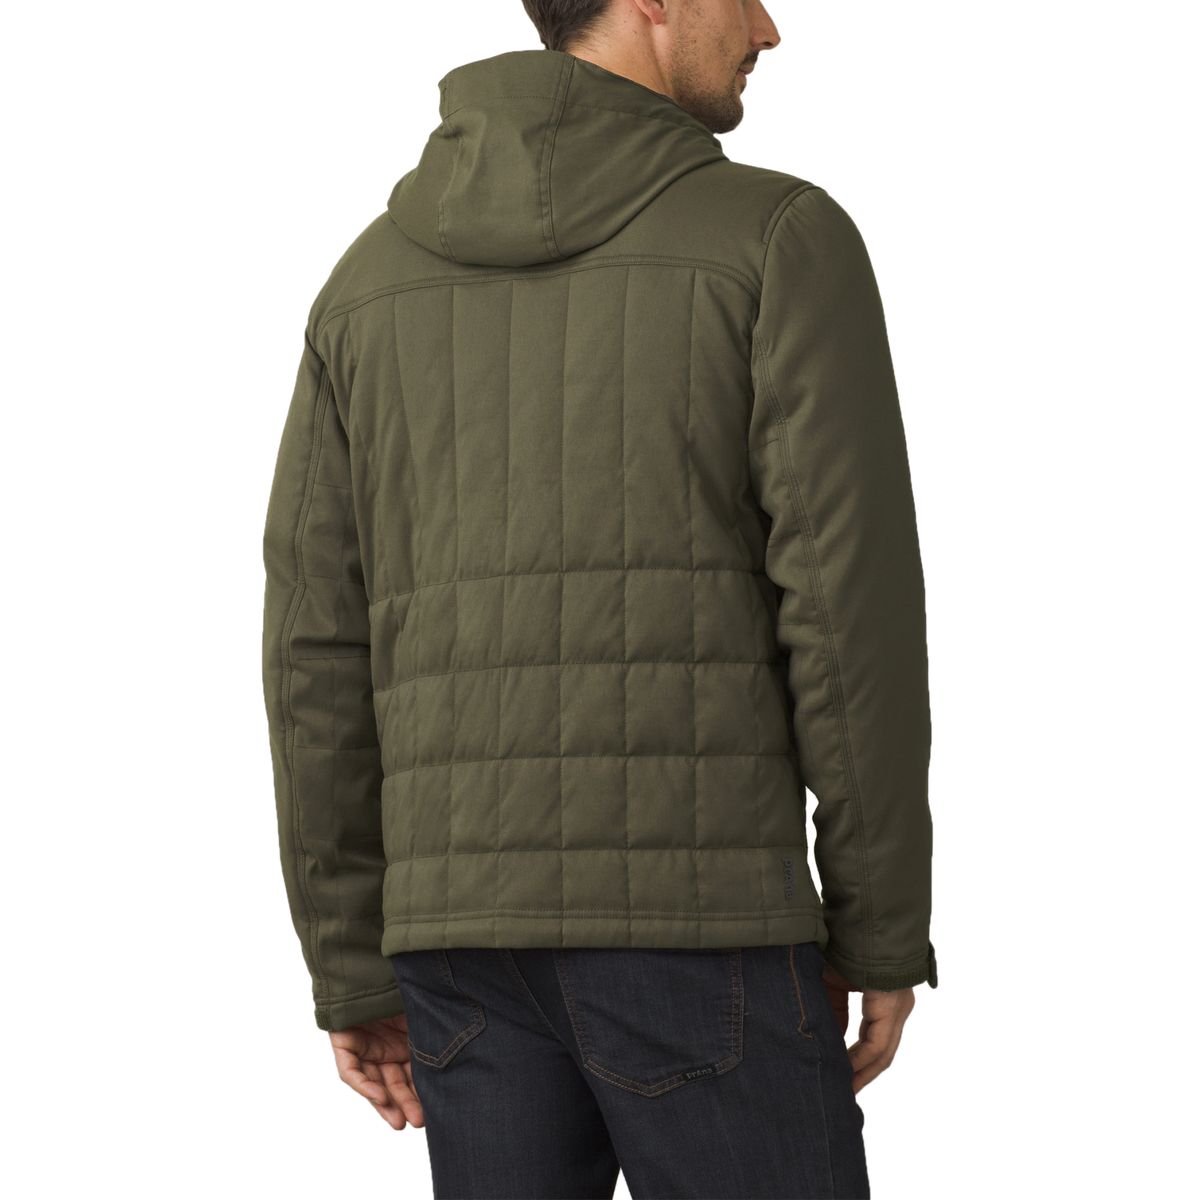 Prana Zion Quilted Jacket - Men's | Backcountry.com